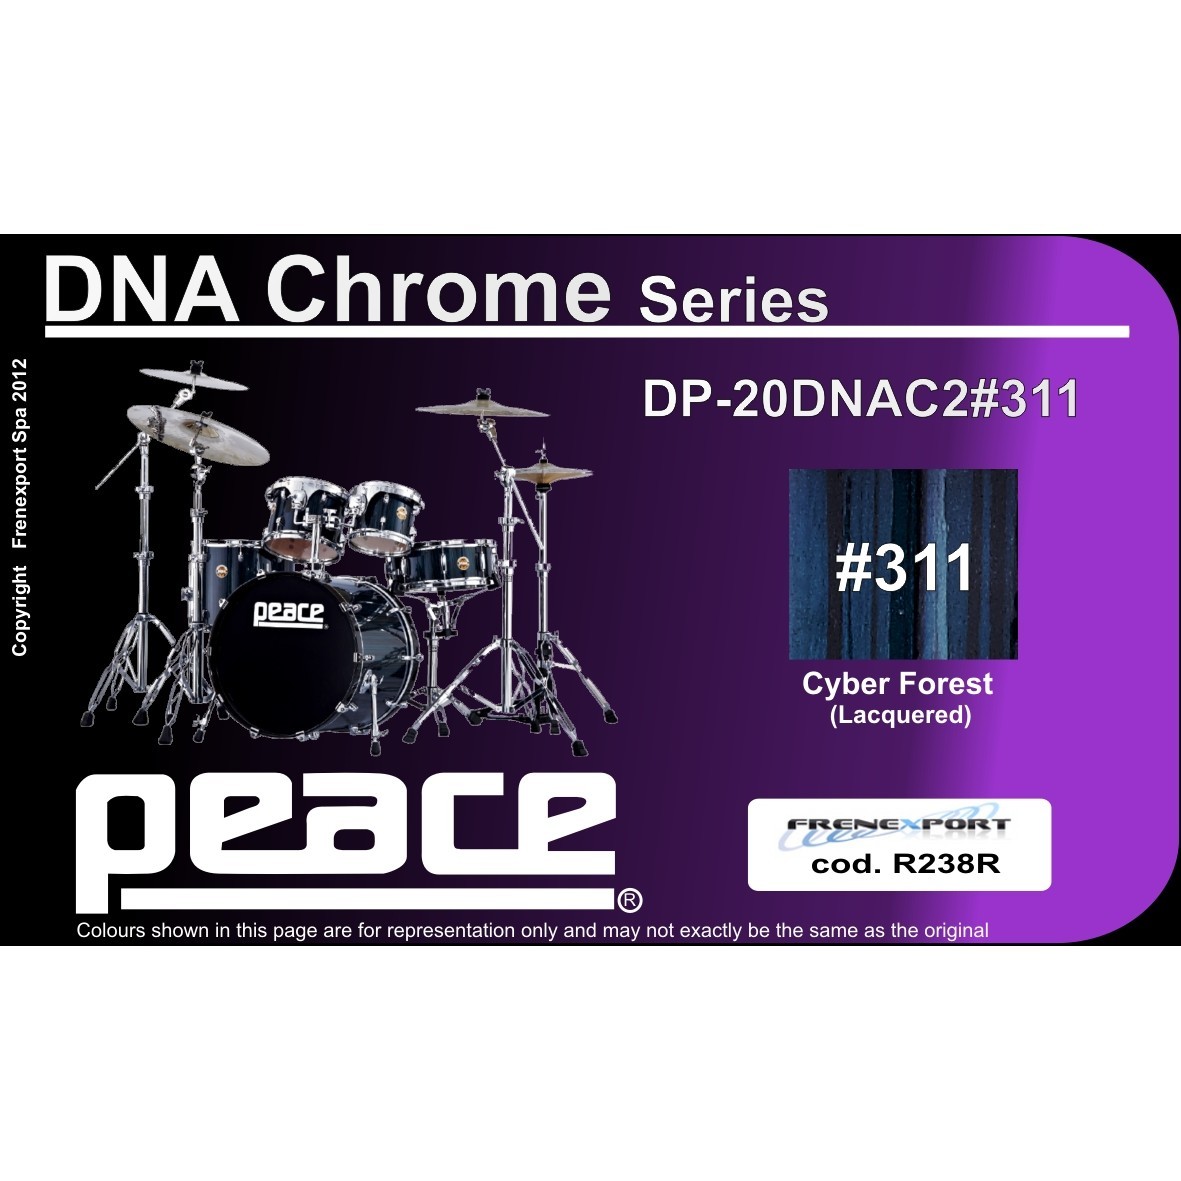 BATTERIA PEACE DNA DP-20DNAC2 #311 CYBER FOREST_2